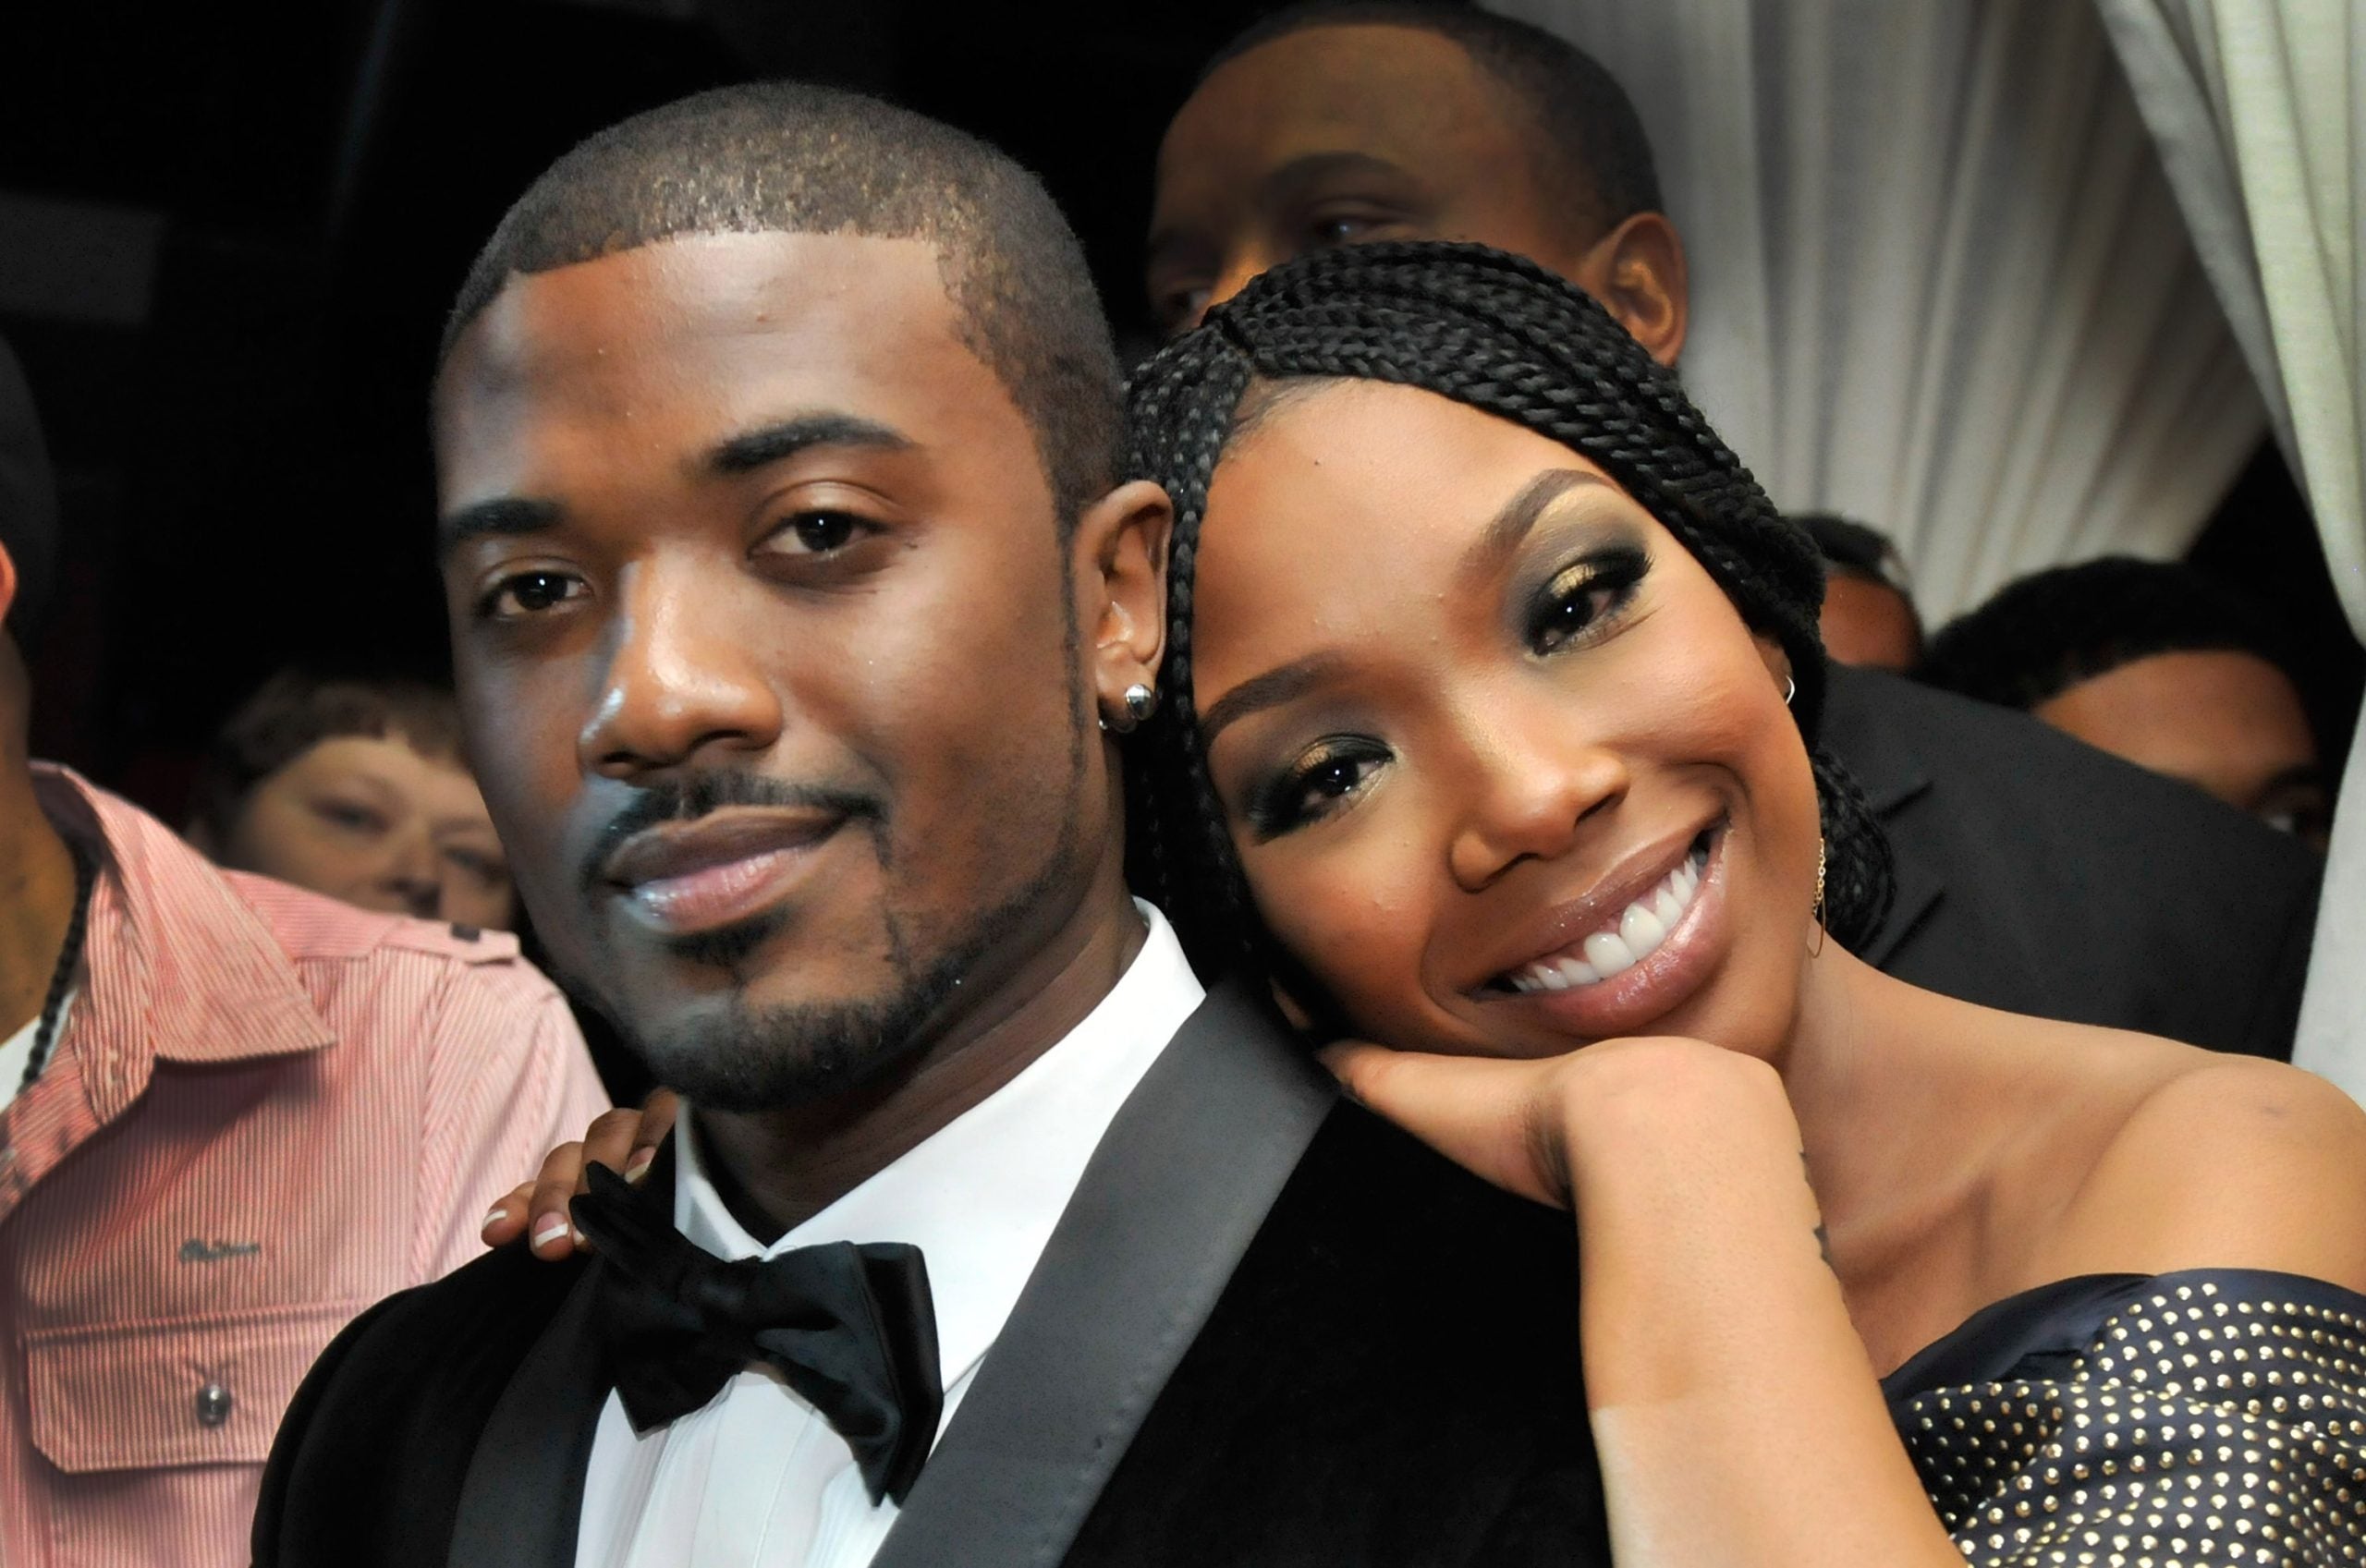 brandy and ray j